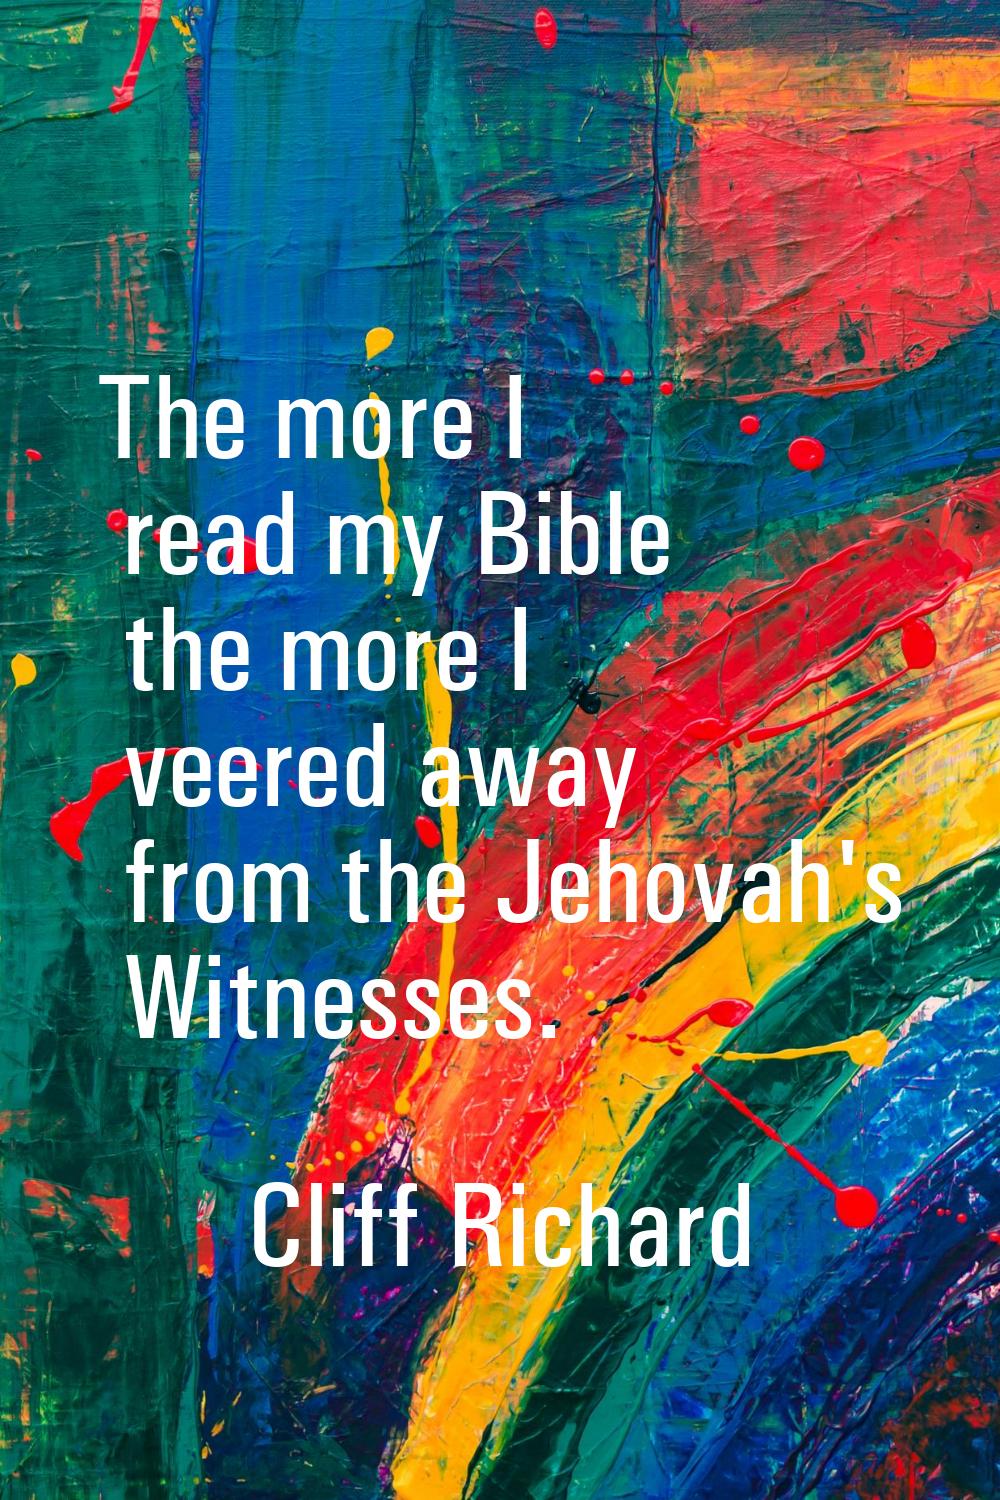 The more I read my Bible the more I veered away from the Jehovah's Witnesses.